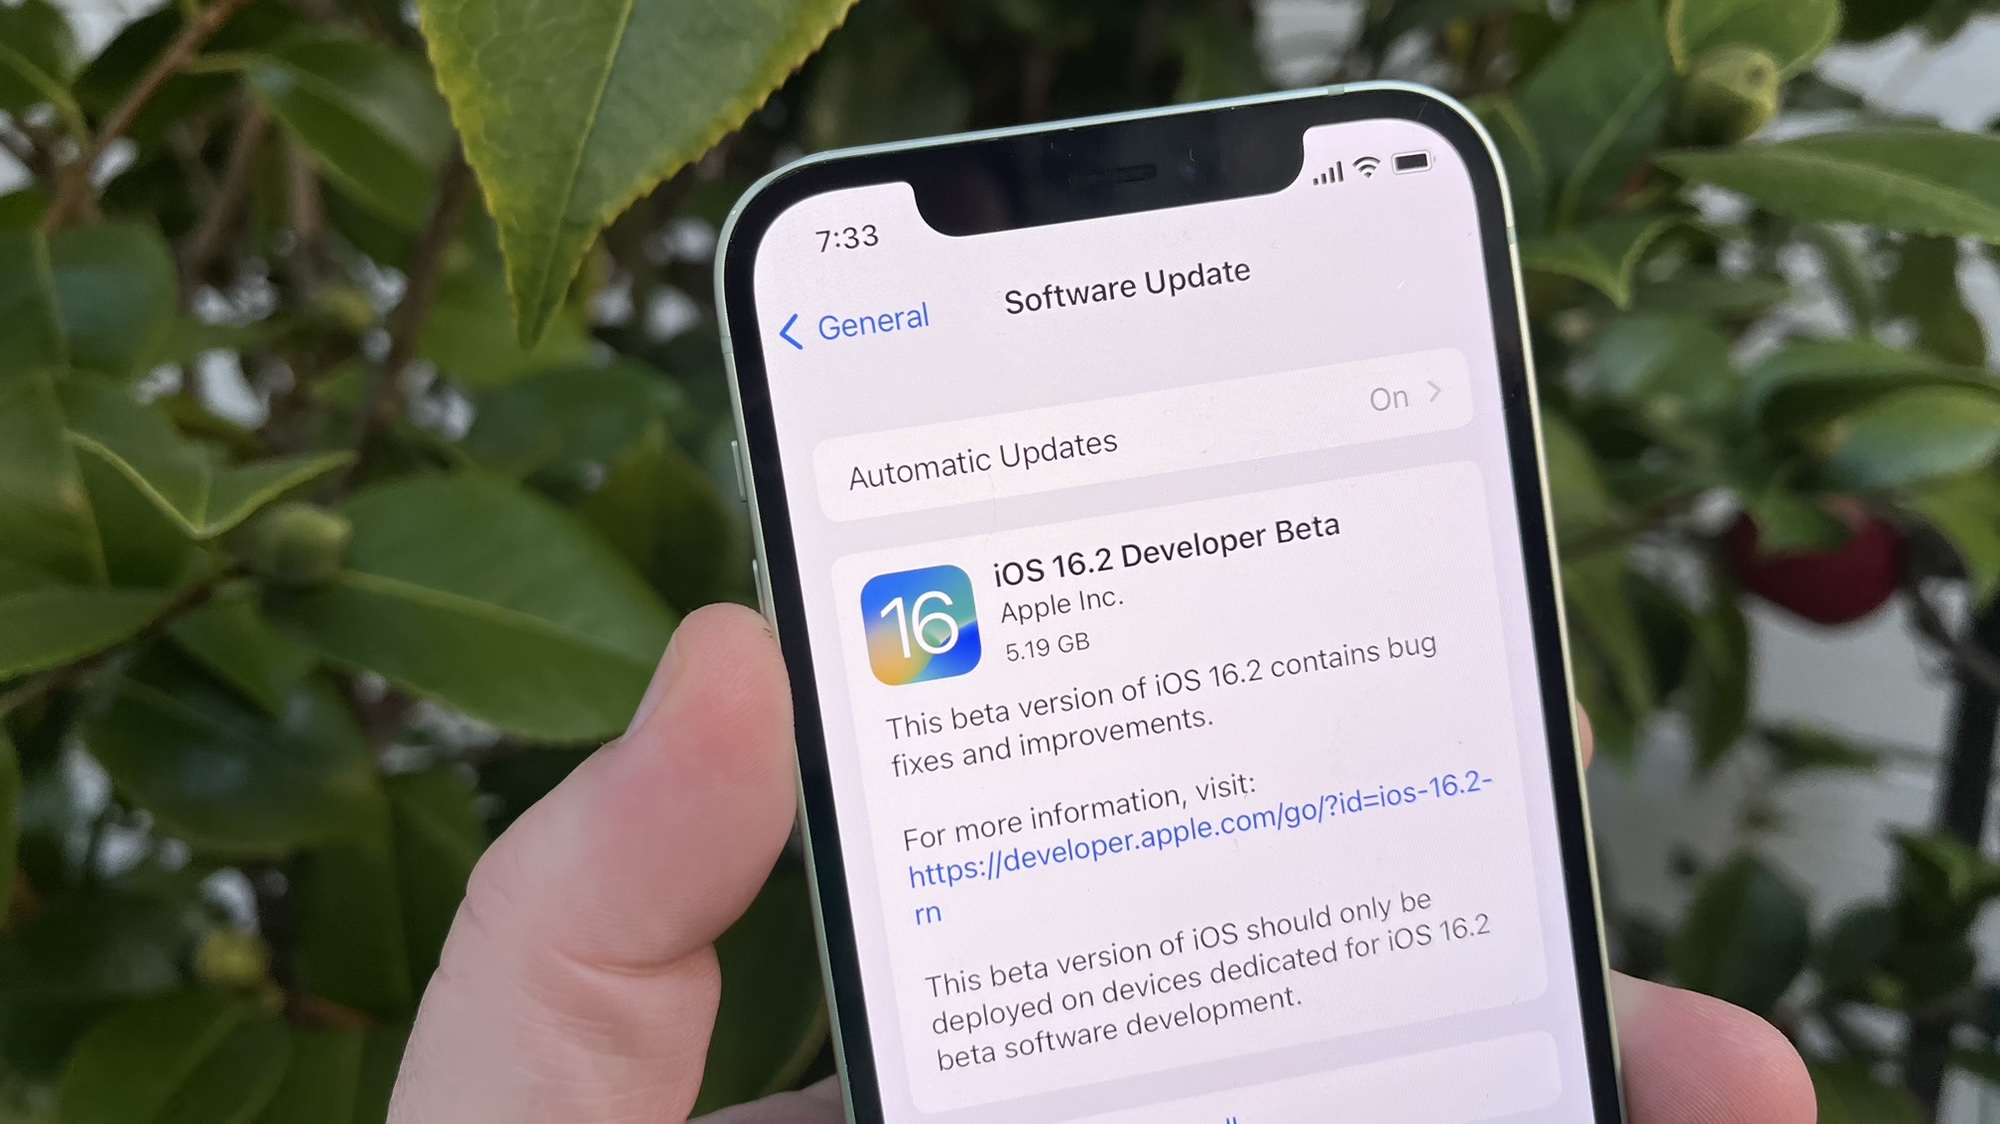 iOS 16.2 beta 1 download screen on an iPhone in front of a plant